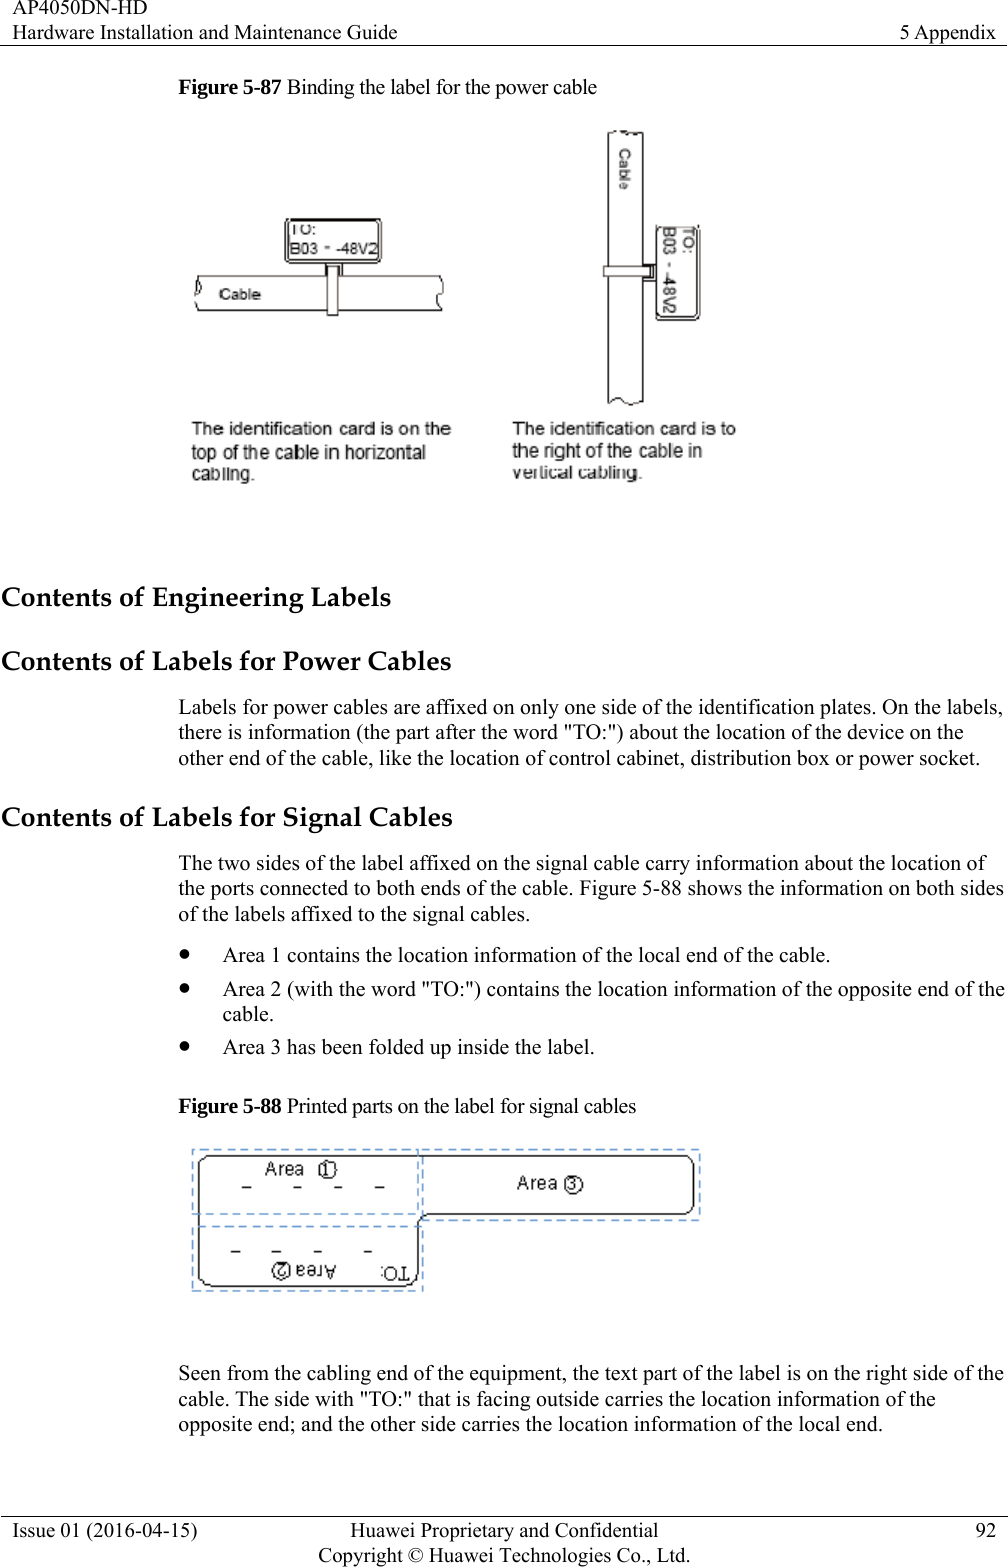 AP4050DN-HD Hardware Installation and Maintenance Guide  5 Appendix Issue 01 (2016-04-15)  Huawei Proprietary and Confidential         Copyright © Huawei Technologies Co., Ltd.92 Figure 5-87 Binding the label for the power cable   Contents of Engineering Labels Contents of Labels for Power Cables Labels for power cables are affixed on only one side of the identification plates. On the labels, there is information (the part after the word &quot;TO:&quot;) about the location of the device on the other end of the cable, like the location of control cabinet, distribution box or power socket. Contents of Labels for Signal Cables The two sides of the label affixed on the signal cable carry information about the location of the ports connected to both ends of the cable. Figure 5-88 shows the information on both sides of the labels affixed to the signal cables.  Area 1 contains the location information of the local end of the cable.  Area 2 (with the word &quot;TO:&quot;) contains the location information of the opposite end of the cable.  Area 3 has been folded up inside the label. Figure 5-88 Printed parts on the label for signal cables   Seen from the cabling end of the equipment, the text part of the label is on the right side of the cable. The side with &quot;TO:&quot; that is facing outside carries the location information of the opposite end; and the other side carries the location information of the local end. 